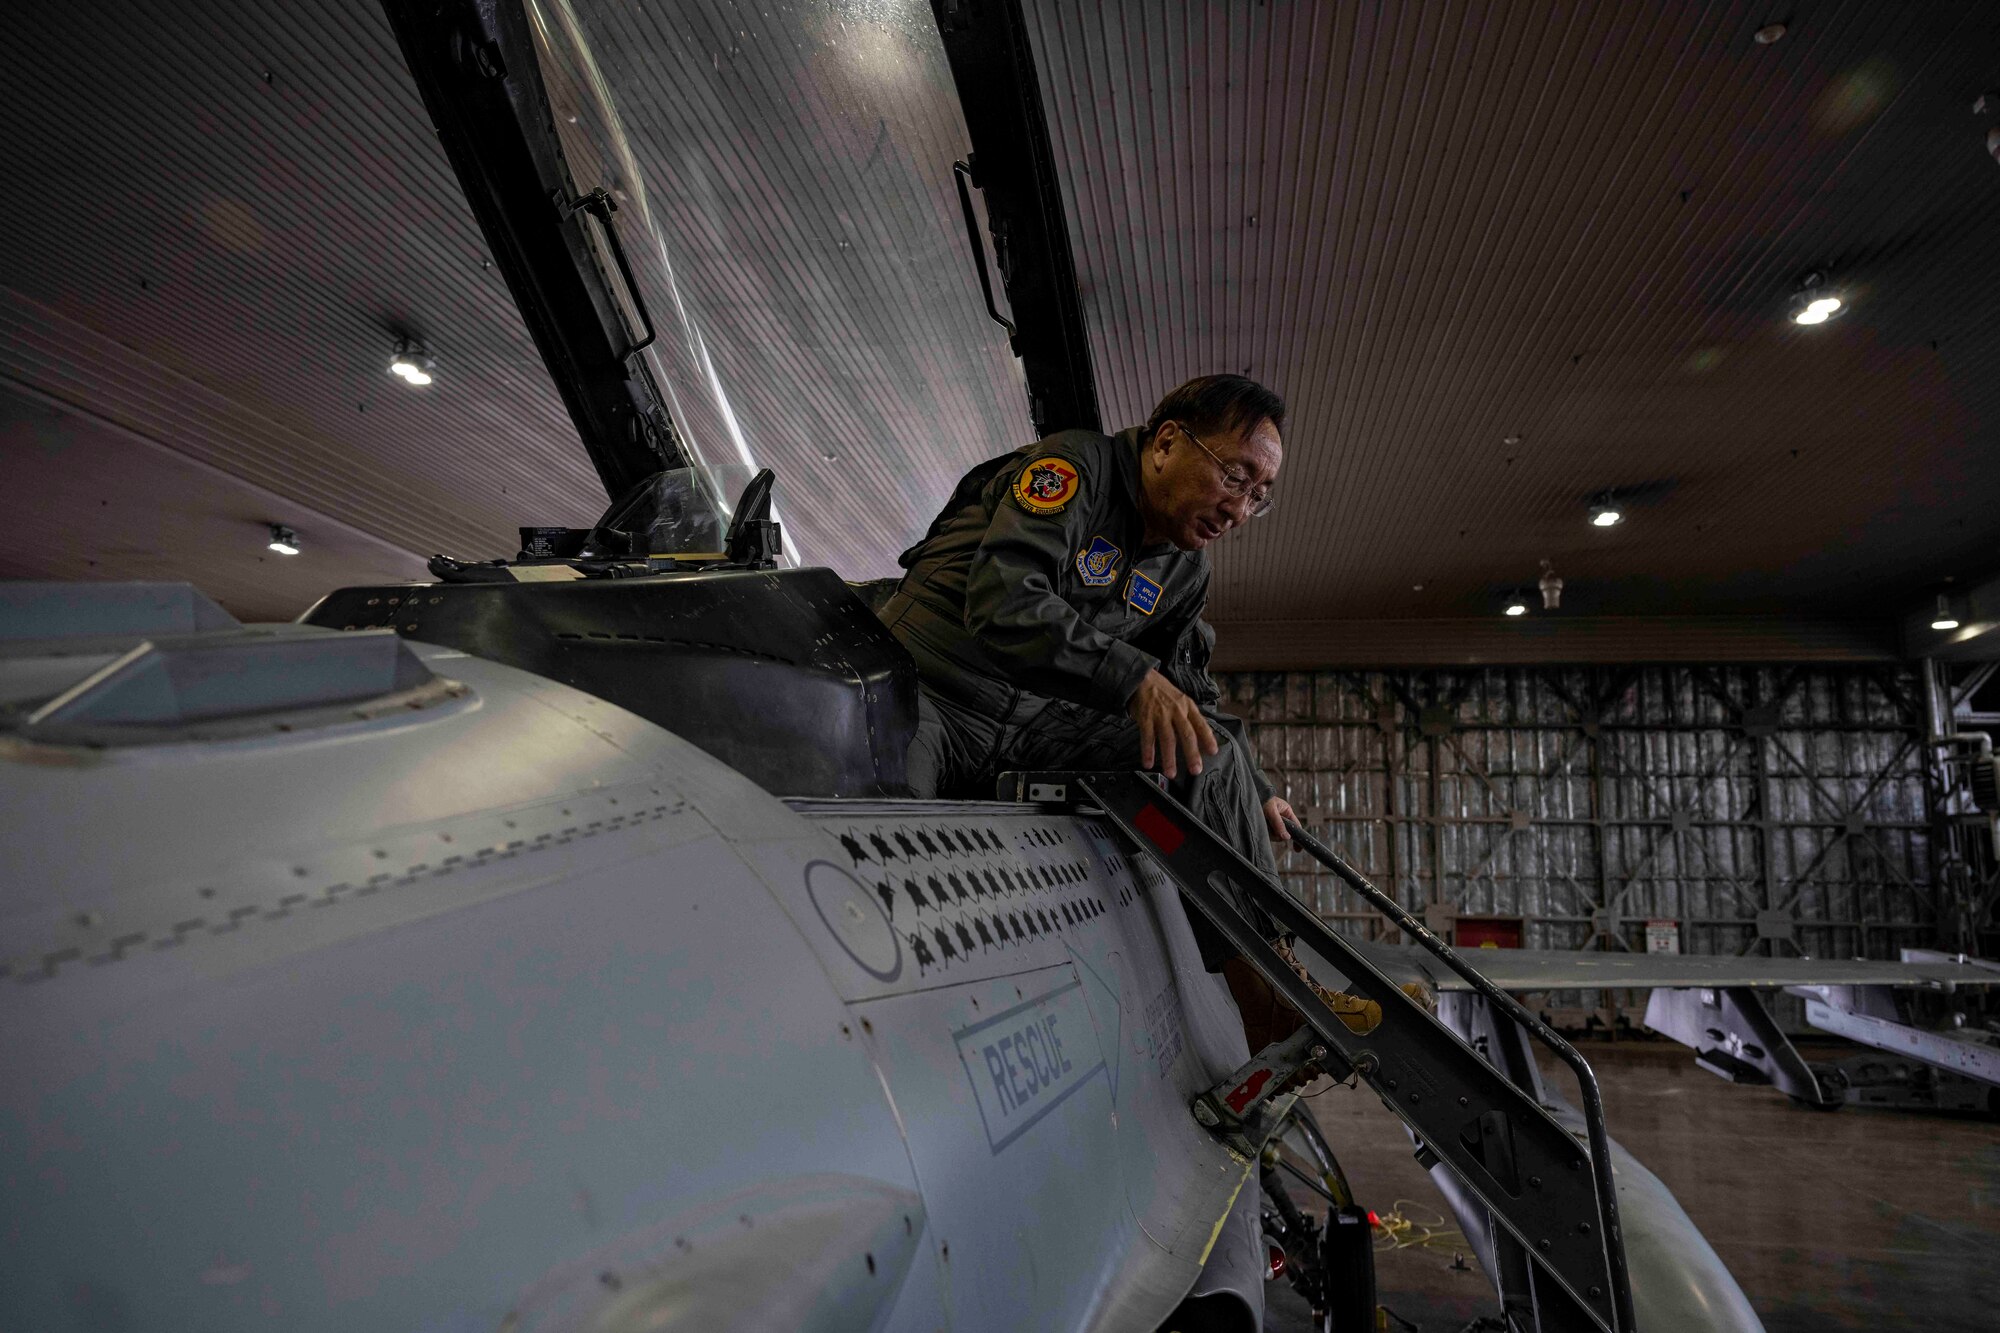 A man steps onto a ladder as he exits from the cockpit of the jet.